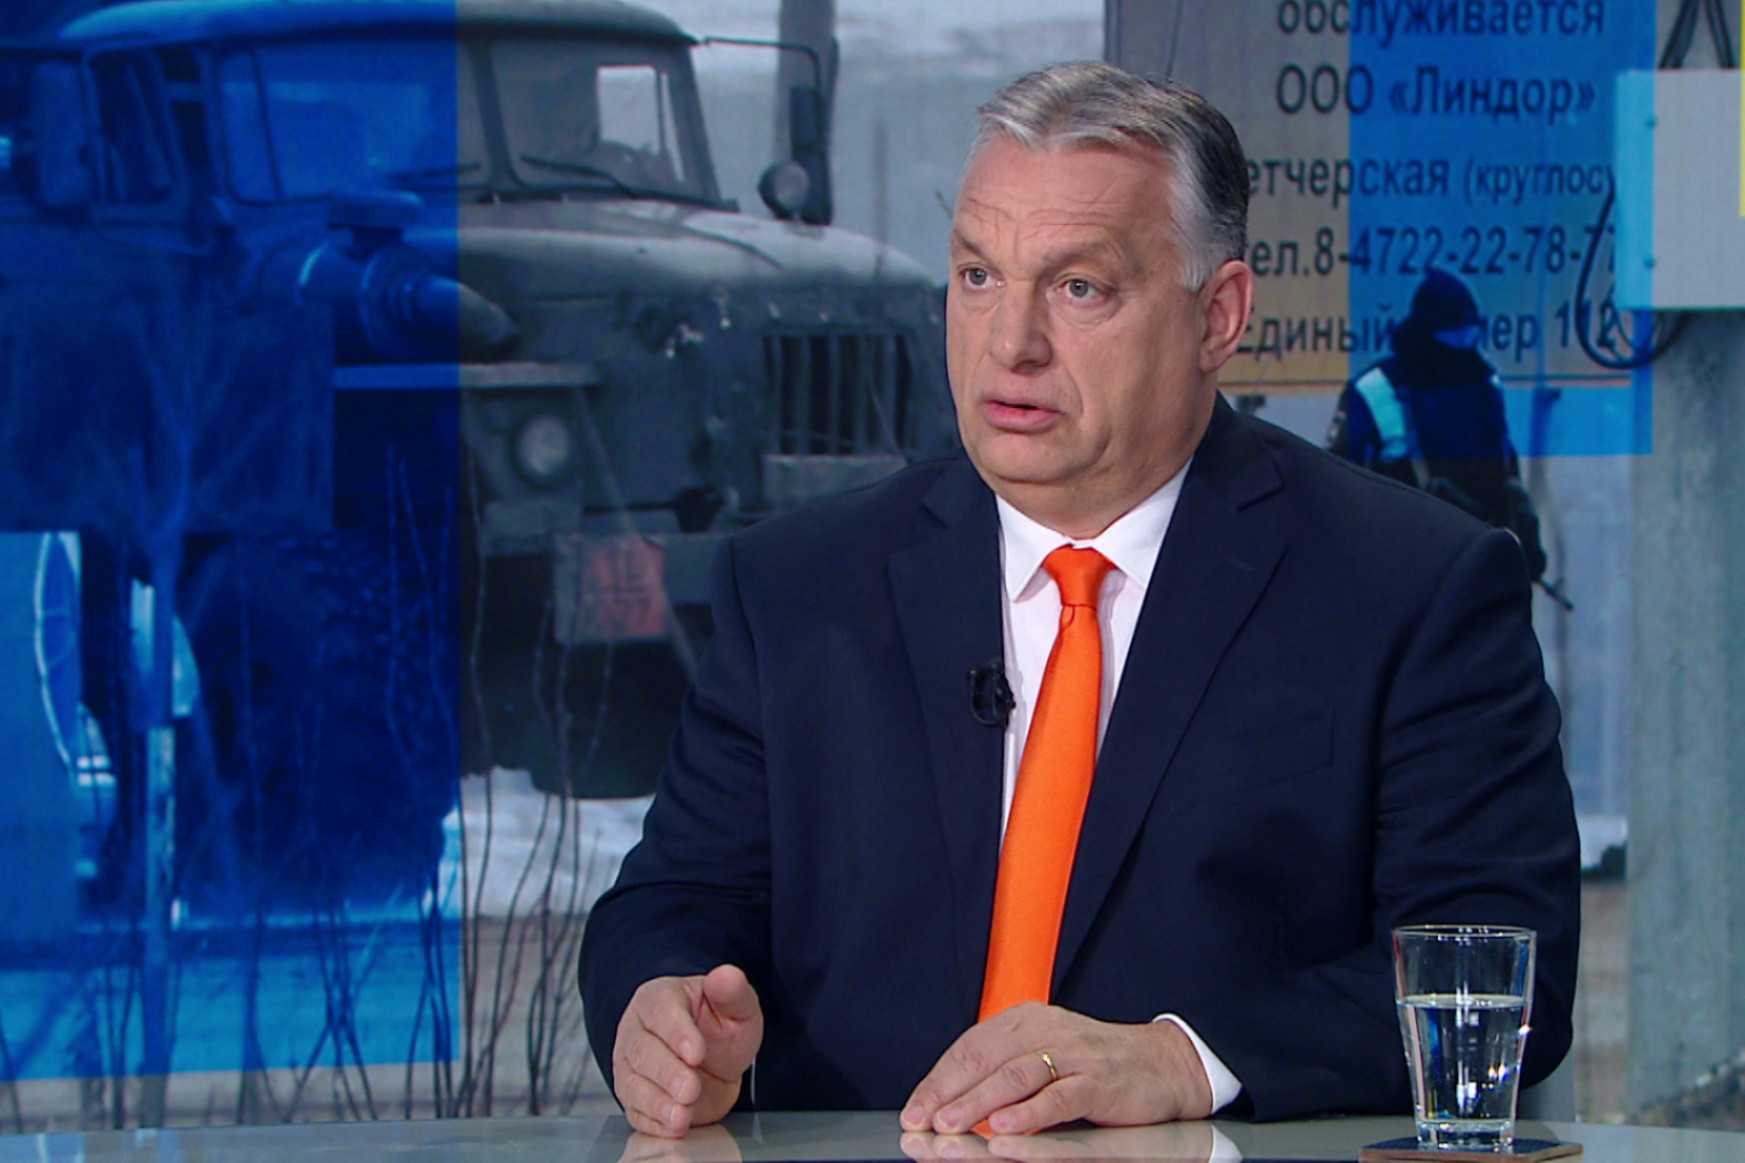 Orbán: We have no responsibilities in this war